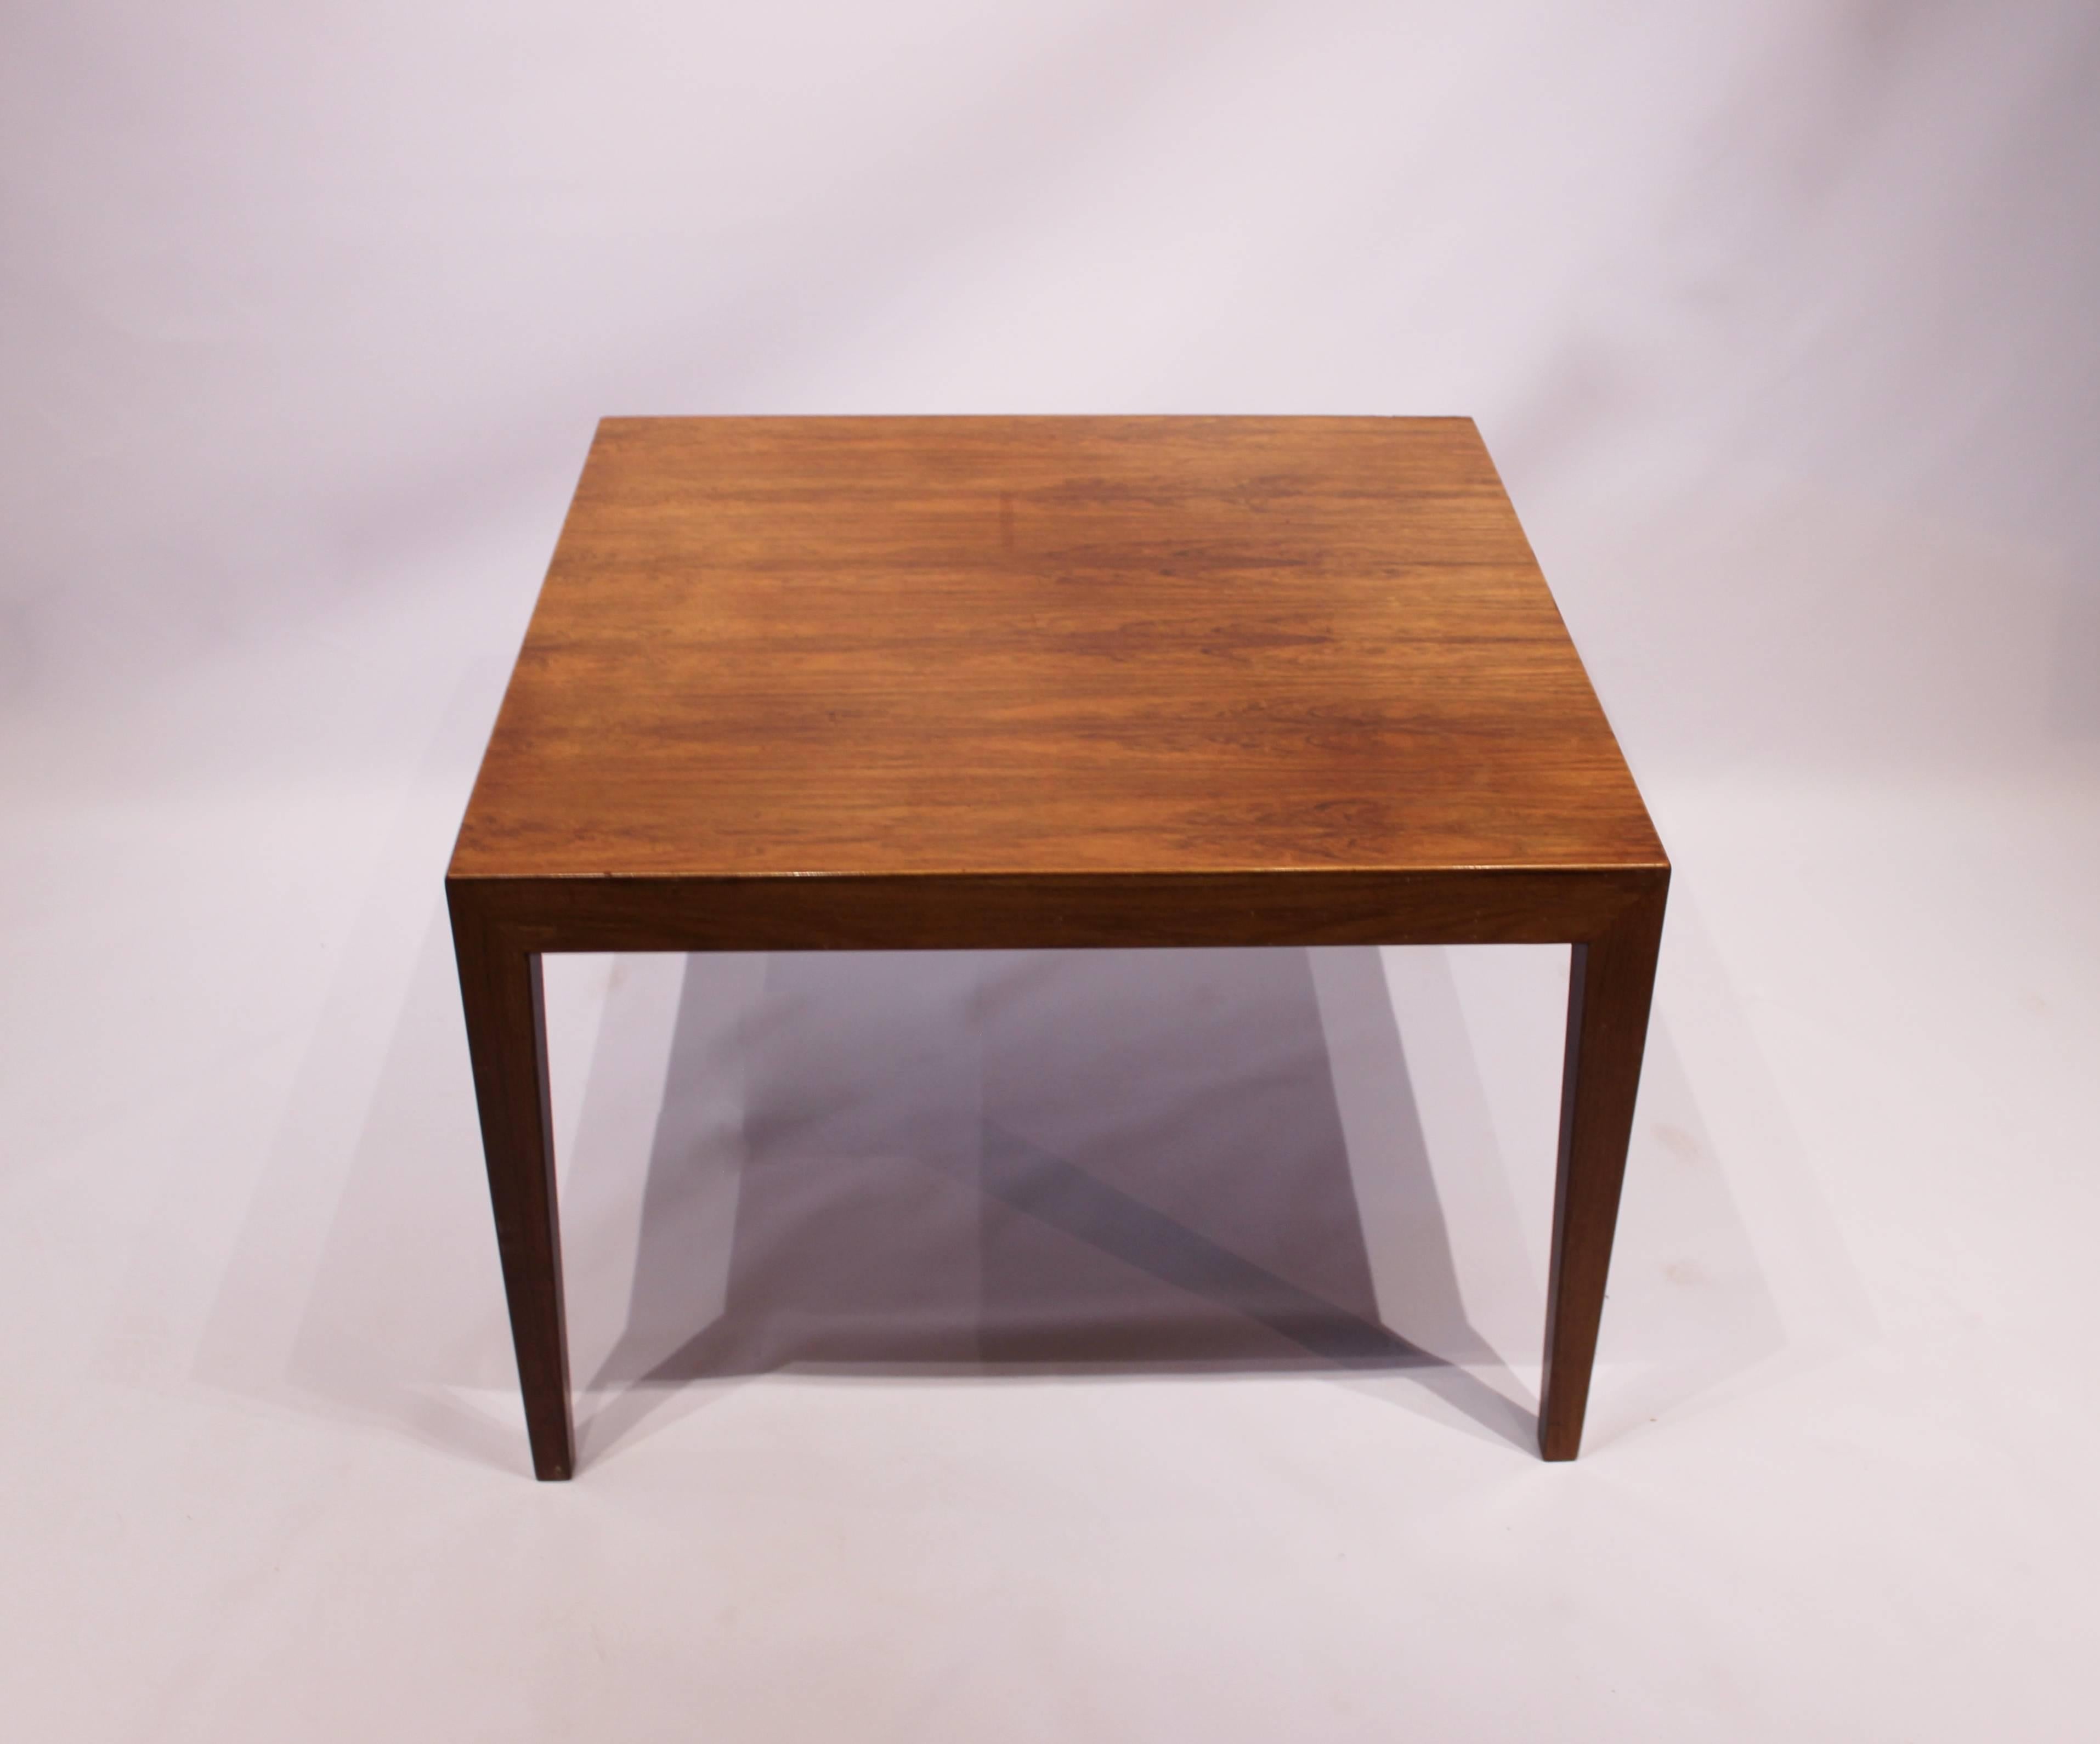 Coffee/side table I dark wood designed by Severin Hansen and manufactured by Haslev Furniture Factory in the 1960s. The table is in great vintage condition.